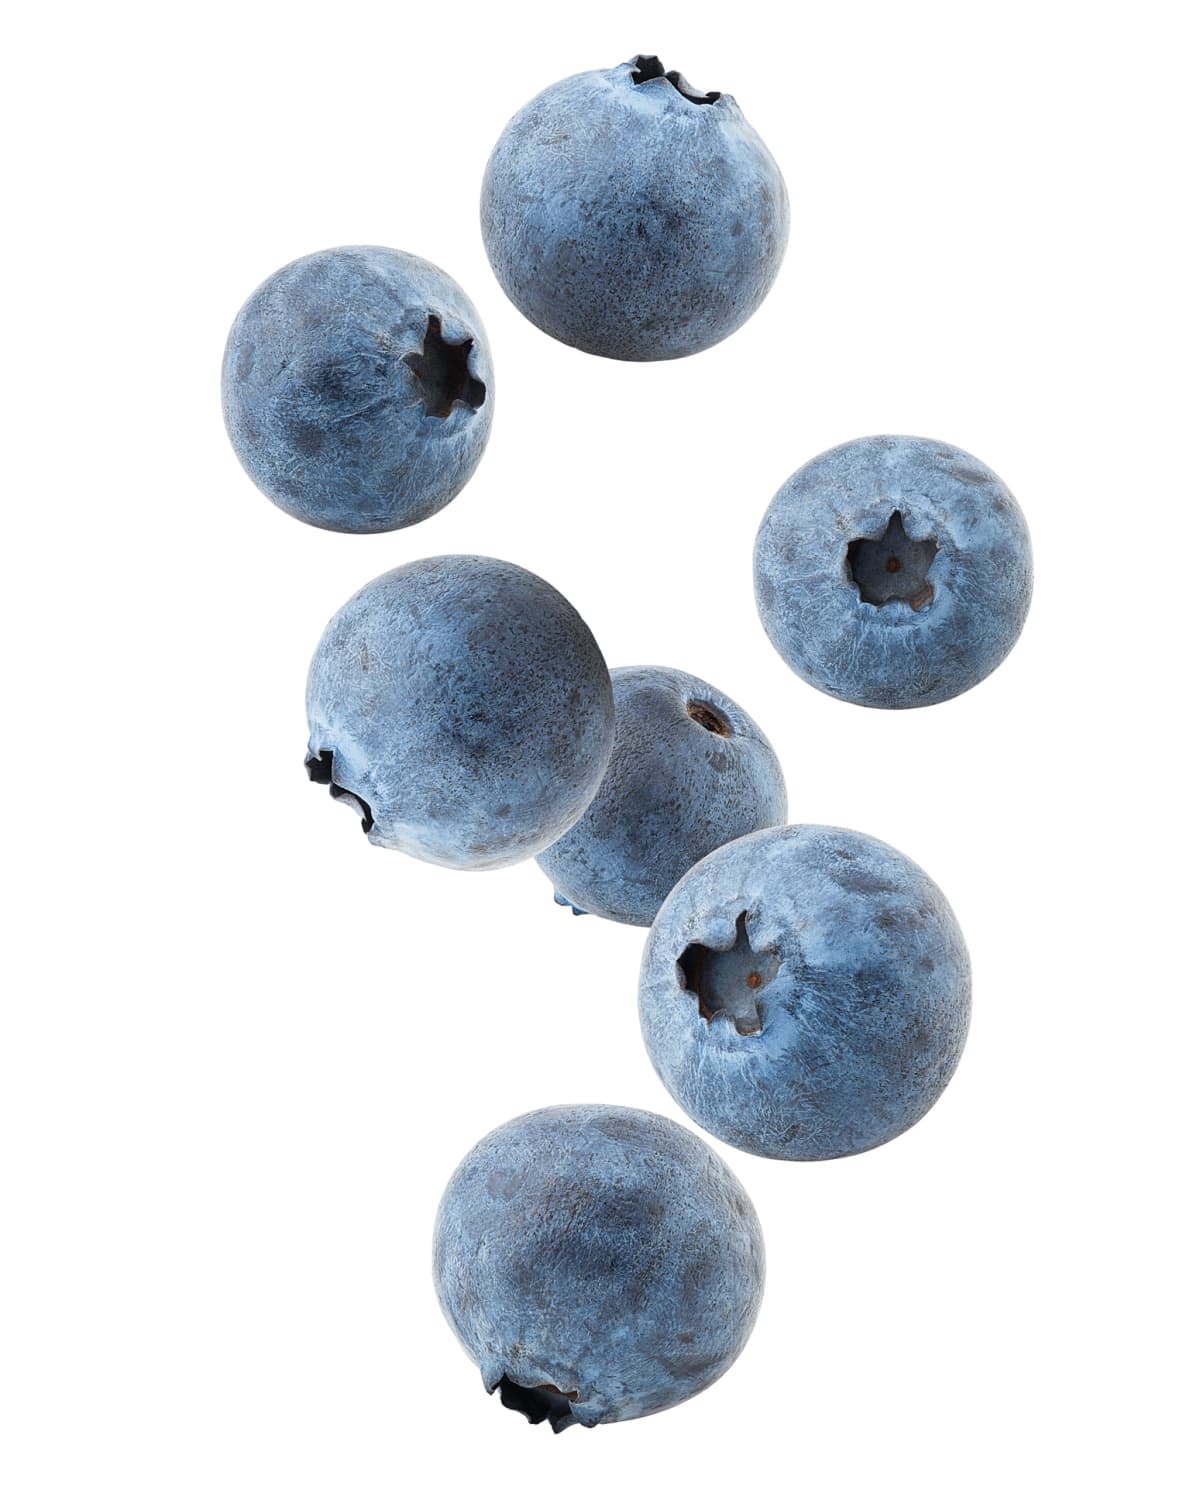 Falling blueberries isolated on white background